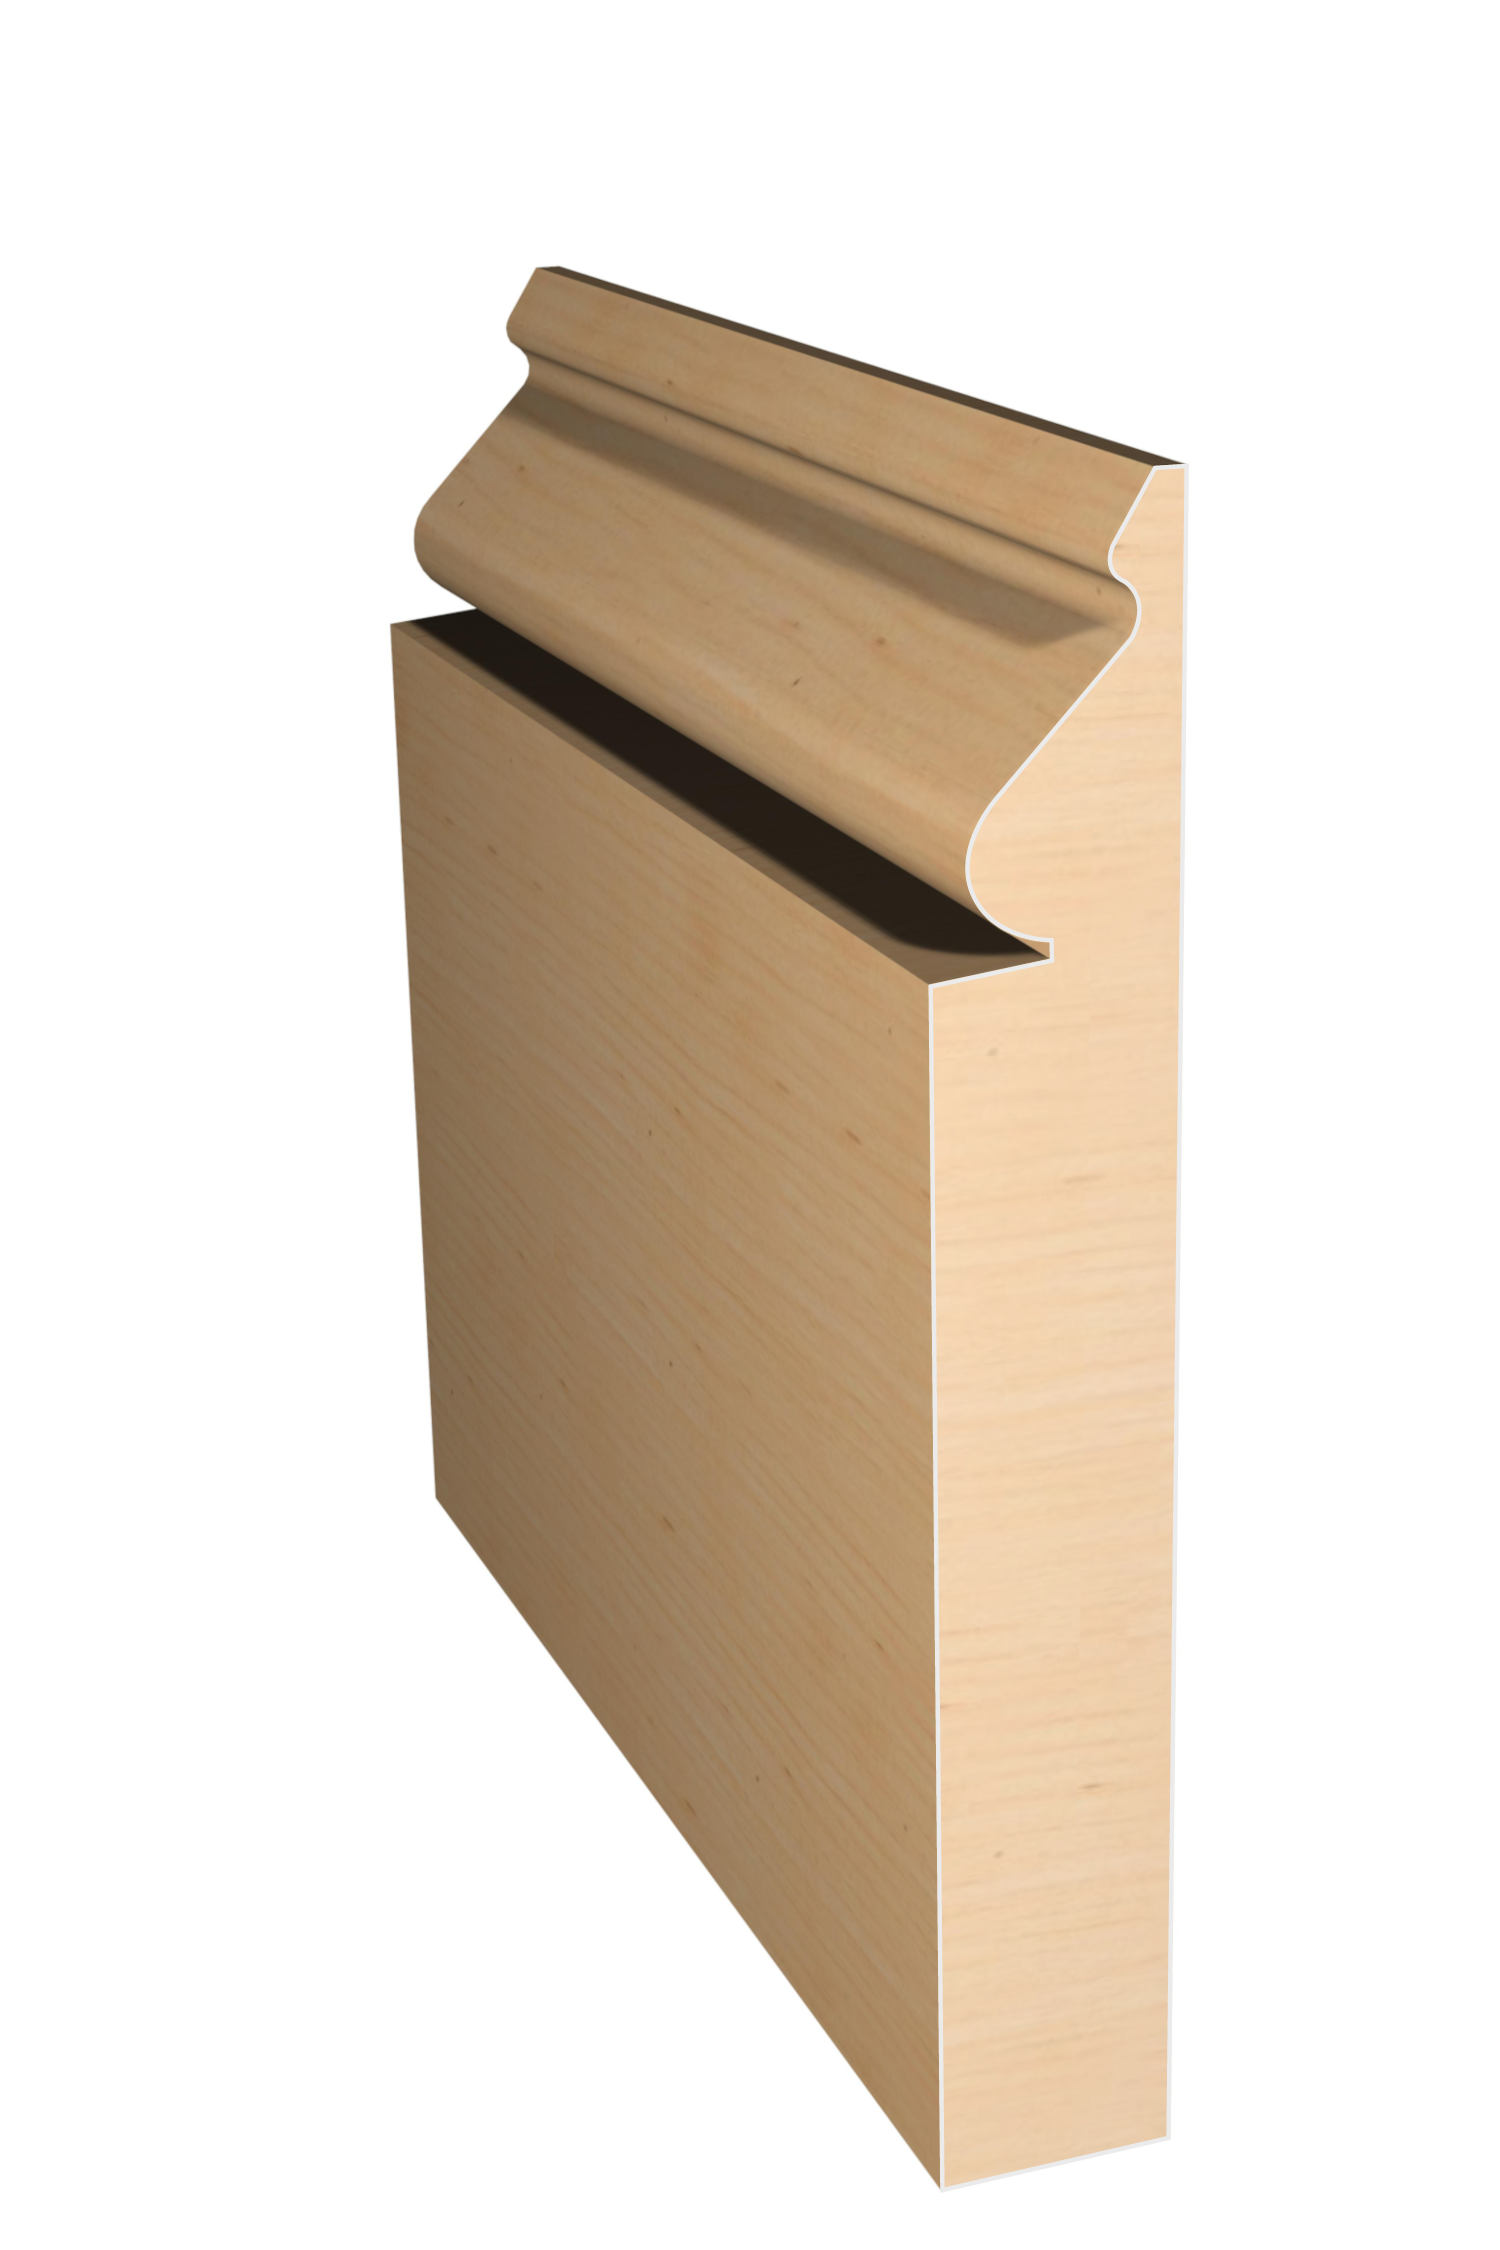 Three dimensional rendering of custom base wood molding BAPL51227 made by Public Lumber Company in Detroit.